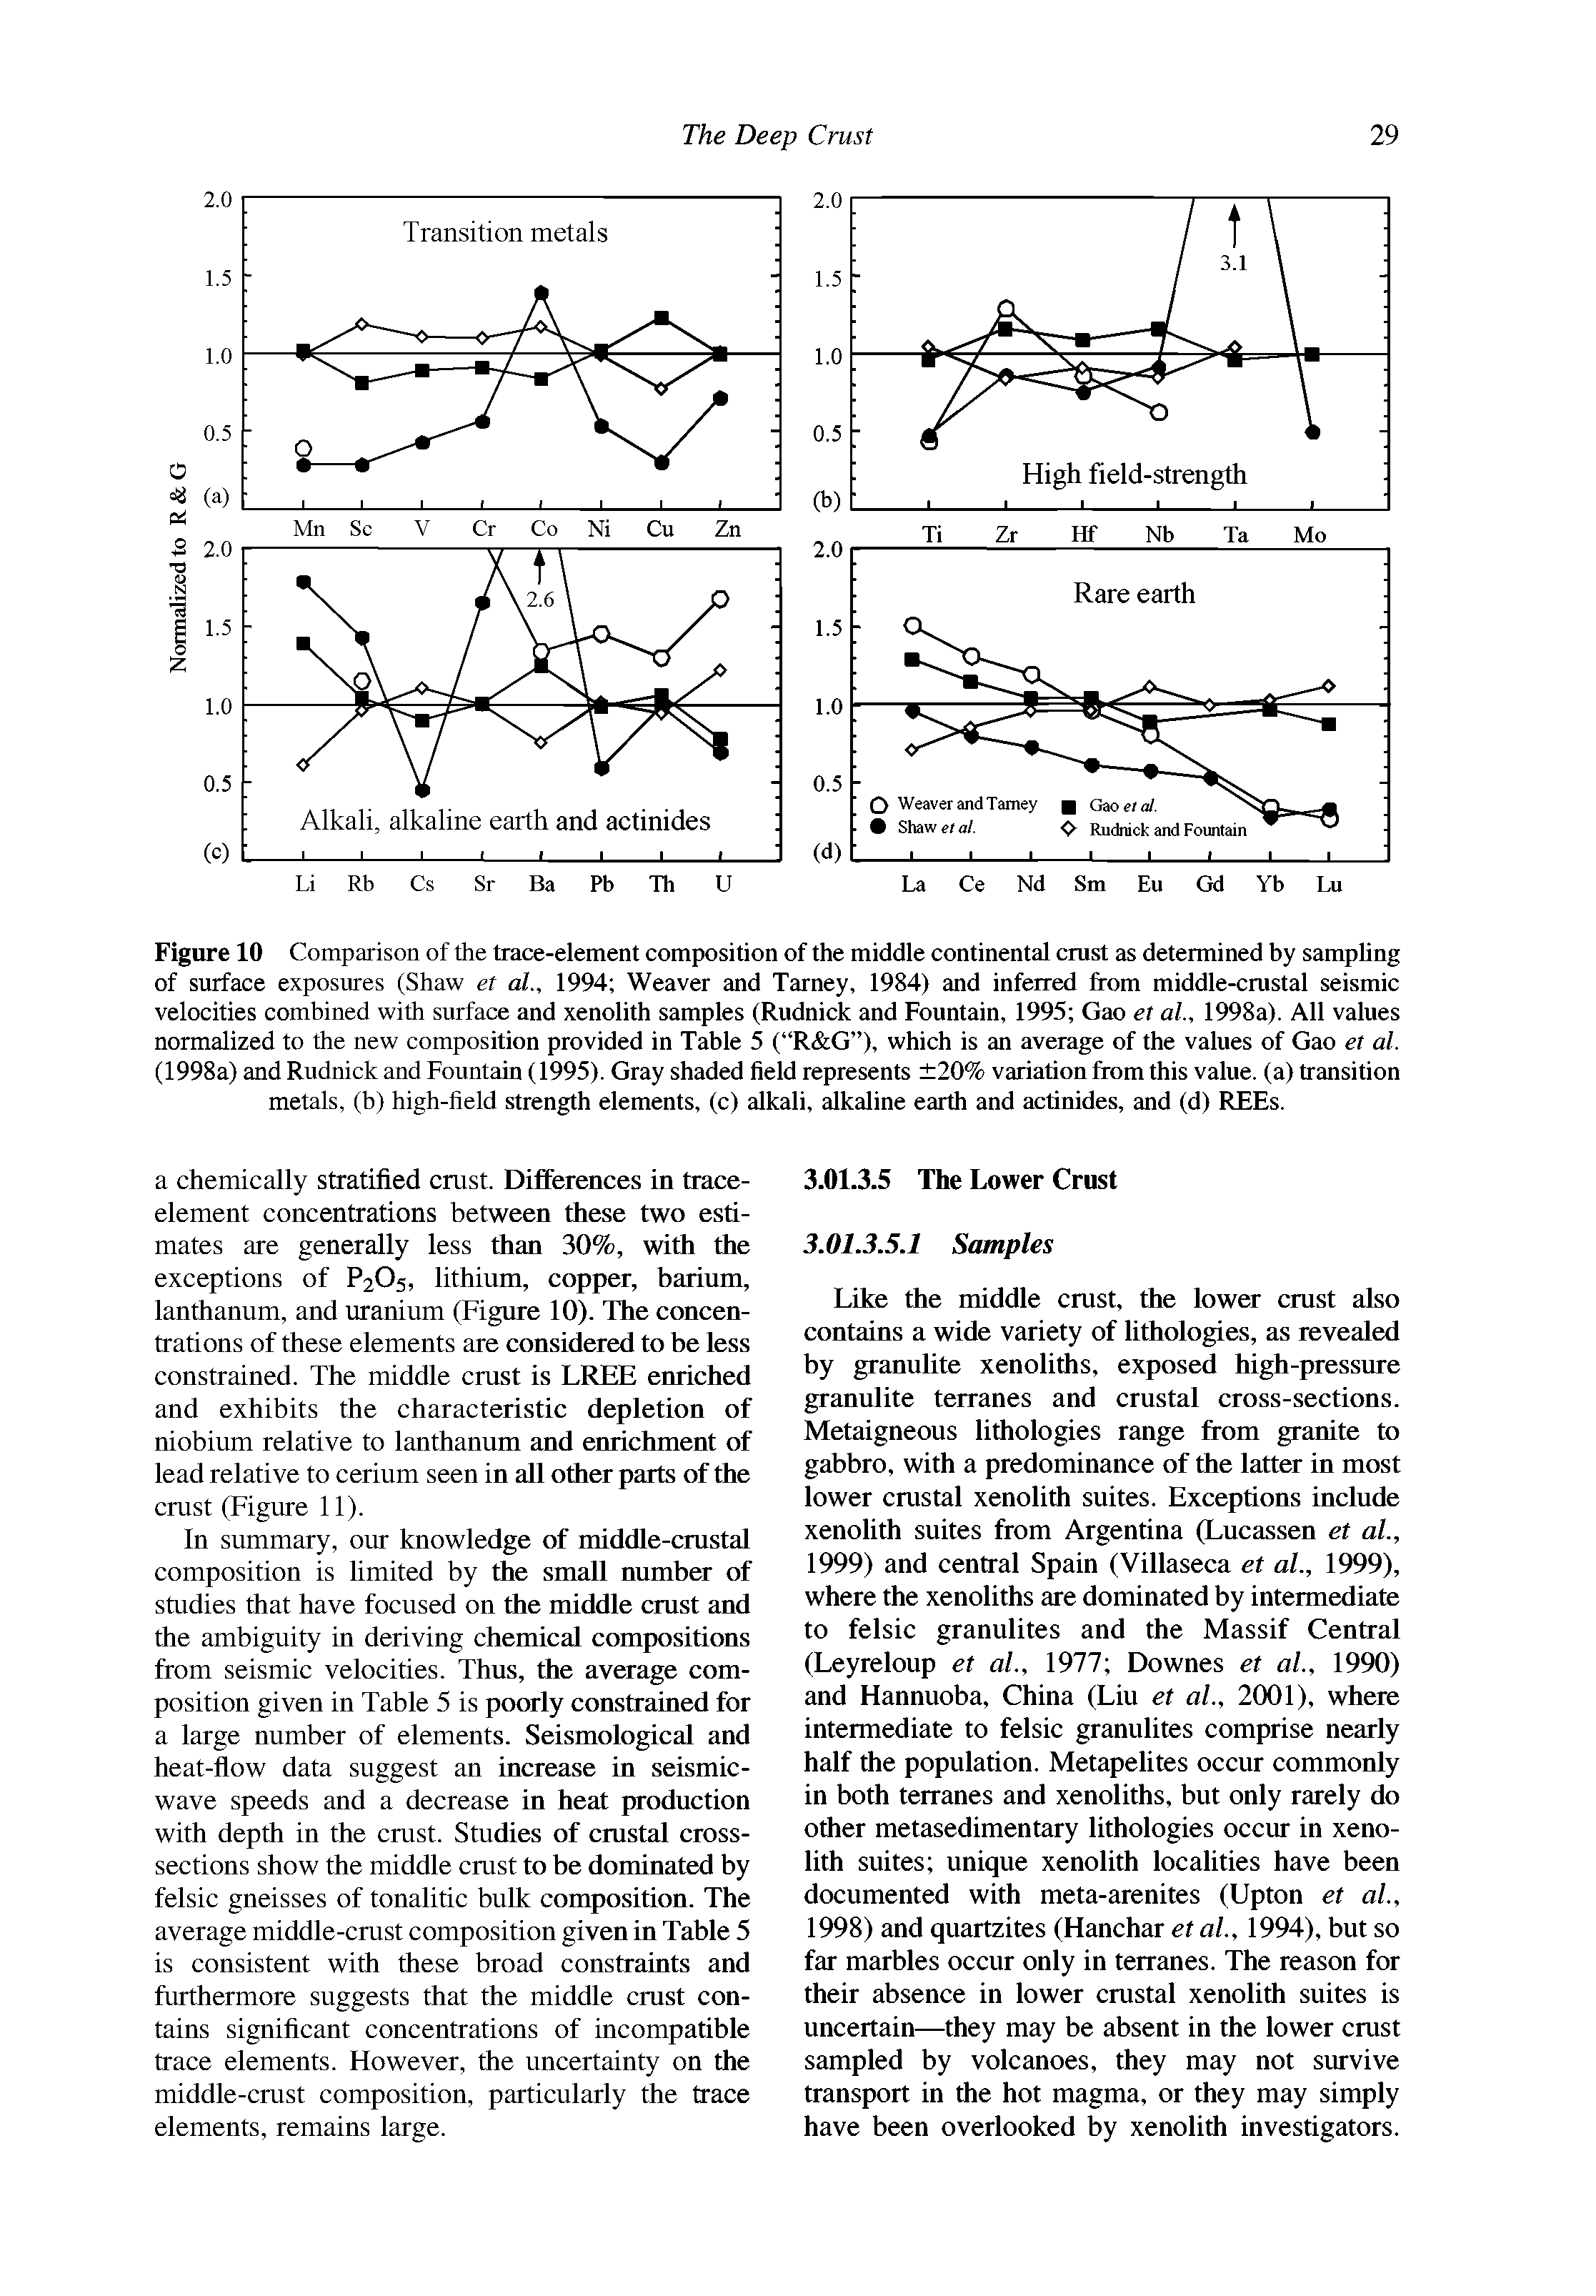 Figure 10 Comparison of the trace-element composition of the middle continental crust as determined by sampling of surface exposures (Shaw et al., 1994 Weaver and Tarney, 1984) and inferred from middle-crustal seismic velocities combined with surface and xenolith samples (Rudnick and Fountain, 1995 Gao et al, 1998a). All values normalized to the new composition provided in Table 5 ( R G ), which is an average of the values of Gao et al. (1998a) and Rudnick and Fountain (1995). Gray shaded field represents 20% variation from this value, (a) transition metals, (b) high-field strength elements, (c) alkali, alkaline earth and actinides, and (d) REEs.